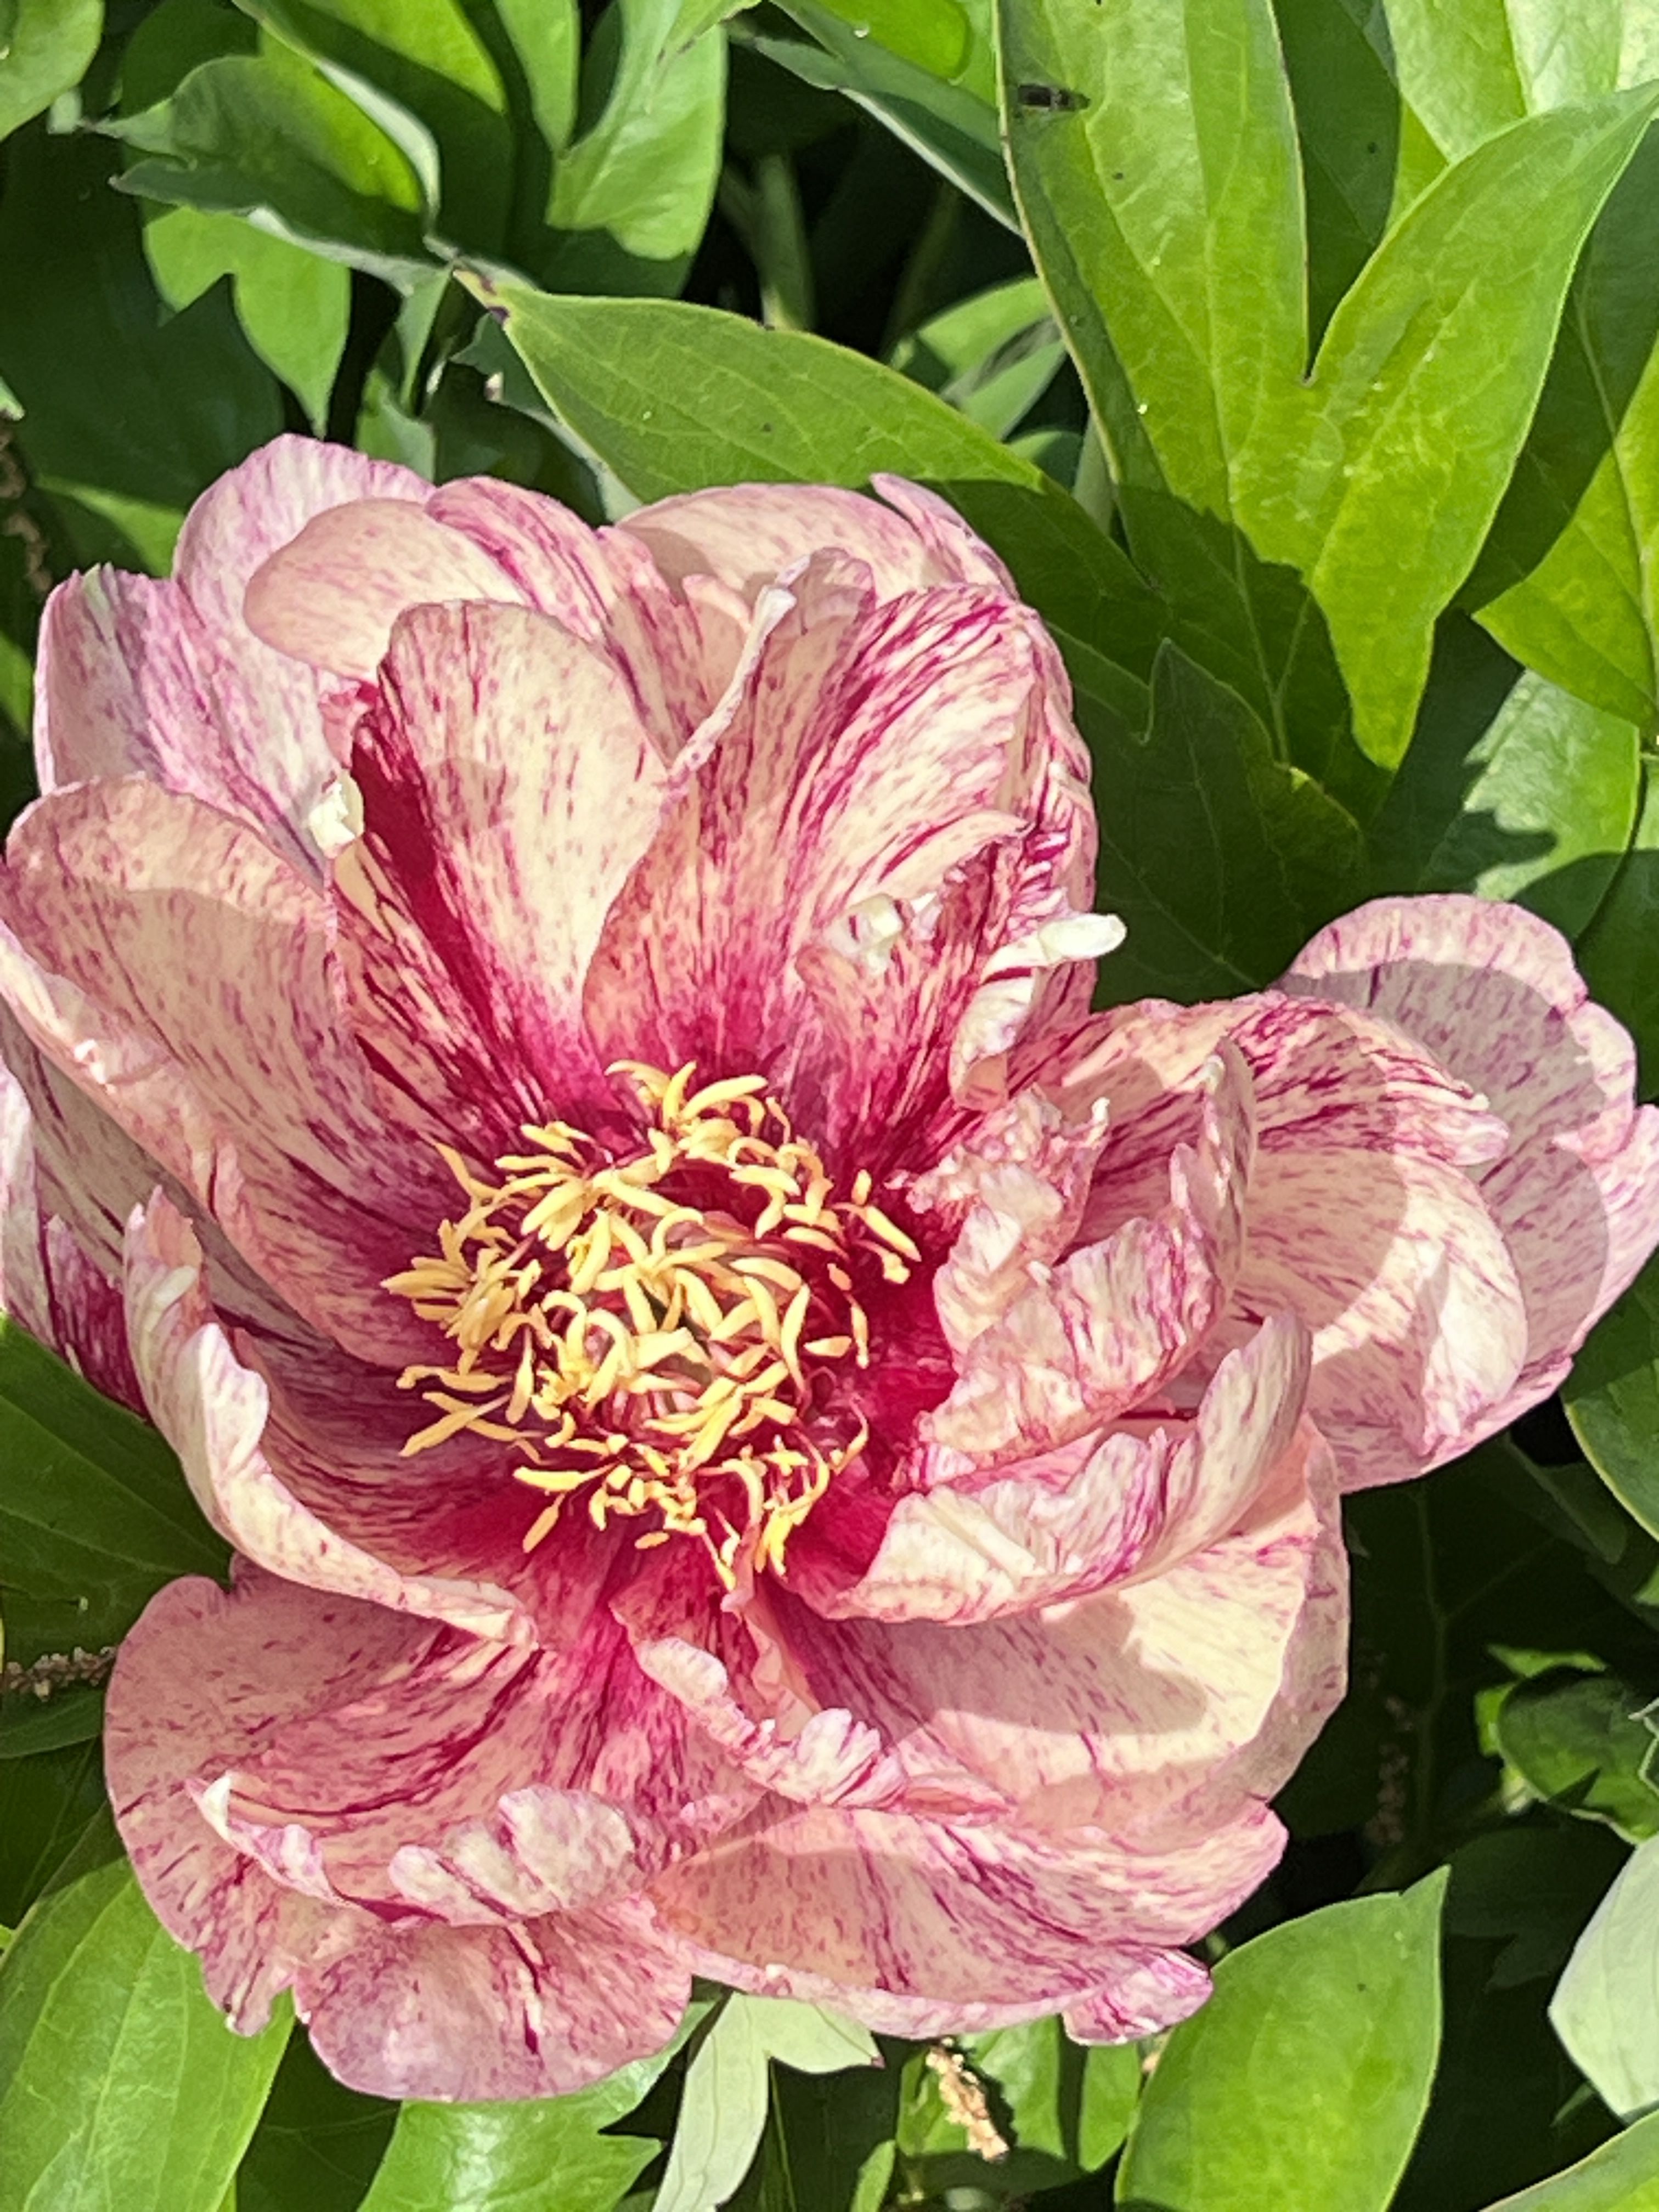 images/plants/paeonia/pae-all-that-jazz/pae-all-that-jazz-0006.JPG